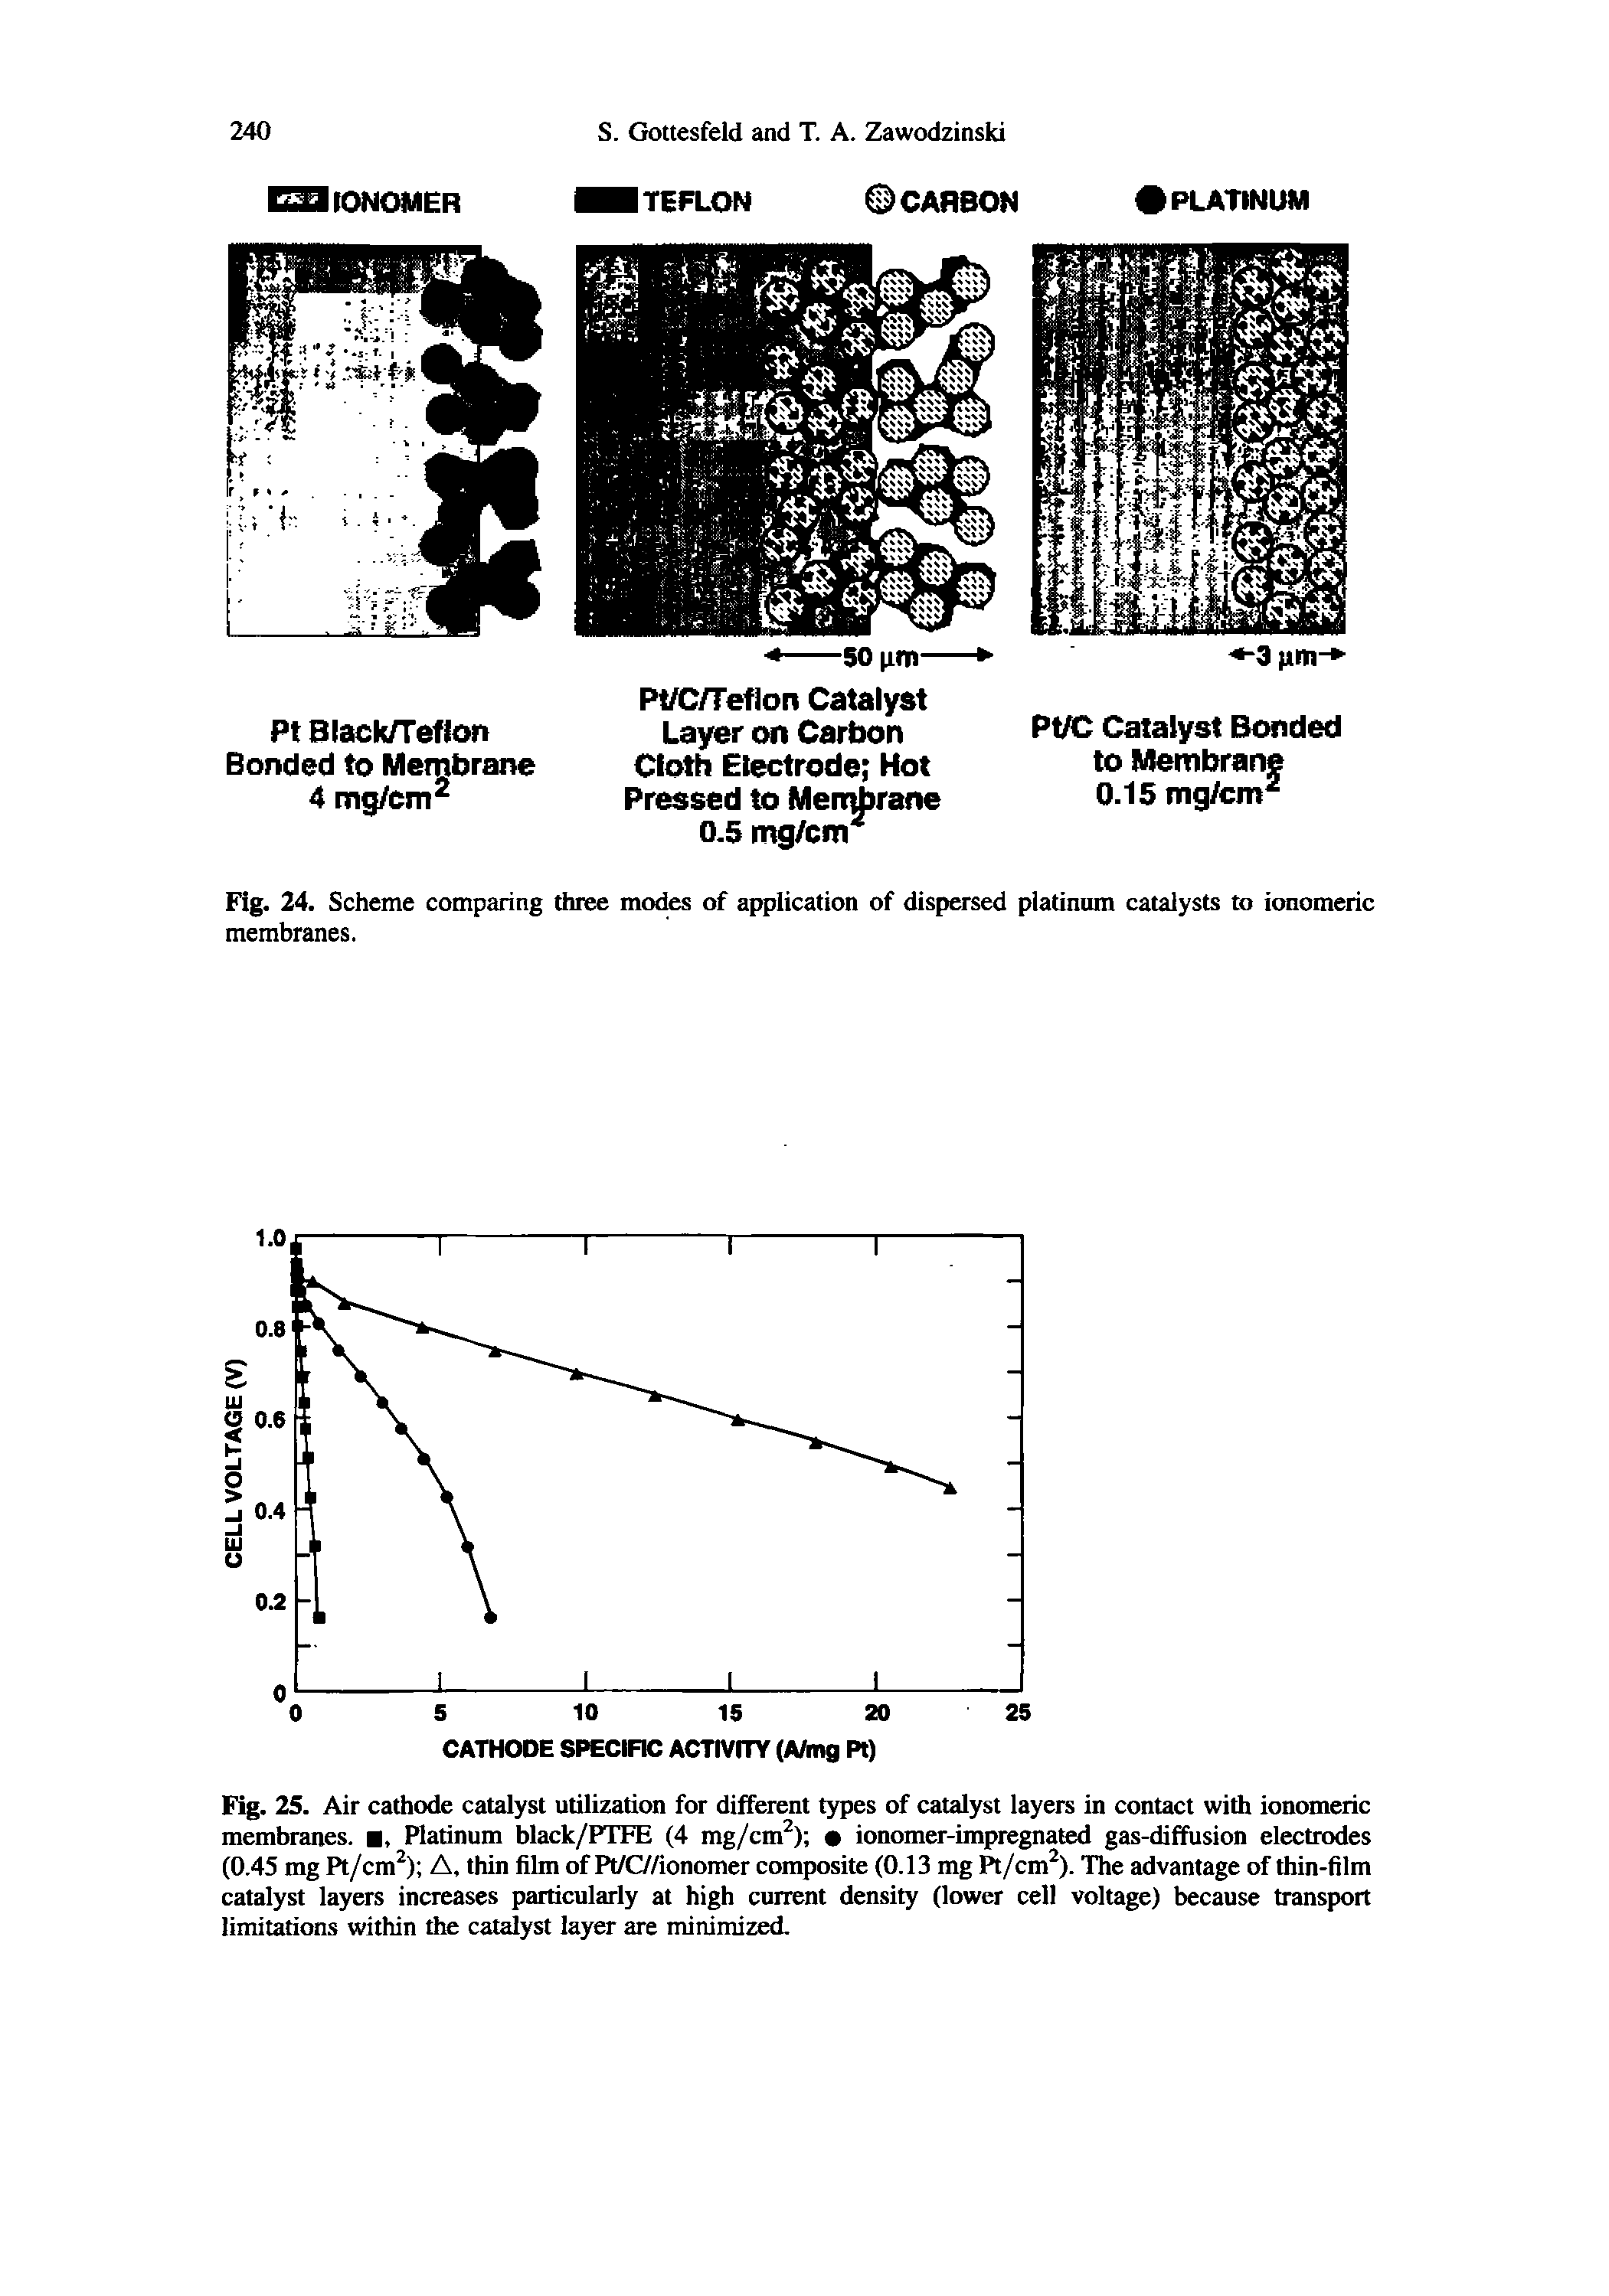 Fig. 25. Air cathode catalyst utilization for different types of catalyst layers in contact with ionomeric membranes. , Platinum black/PTFE (4 mg/cm ) ionomer-impregnated gas-diffusion electrodes (0.45 mg Pt/cm ) A, thin film of Pt/C//ionomer composite (0.13 mg Pt/cm ). The advantage of thin-film catalyst layers increases particularly at high current density (lower cell voltage) because transport limitations within the catalyst layer are minimized.